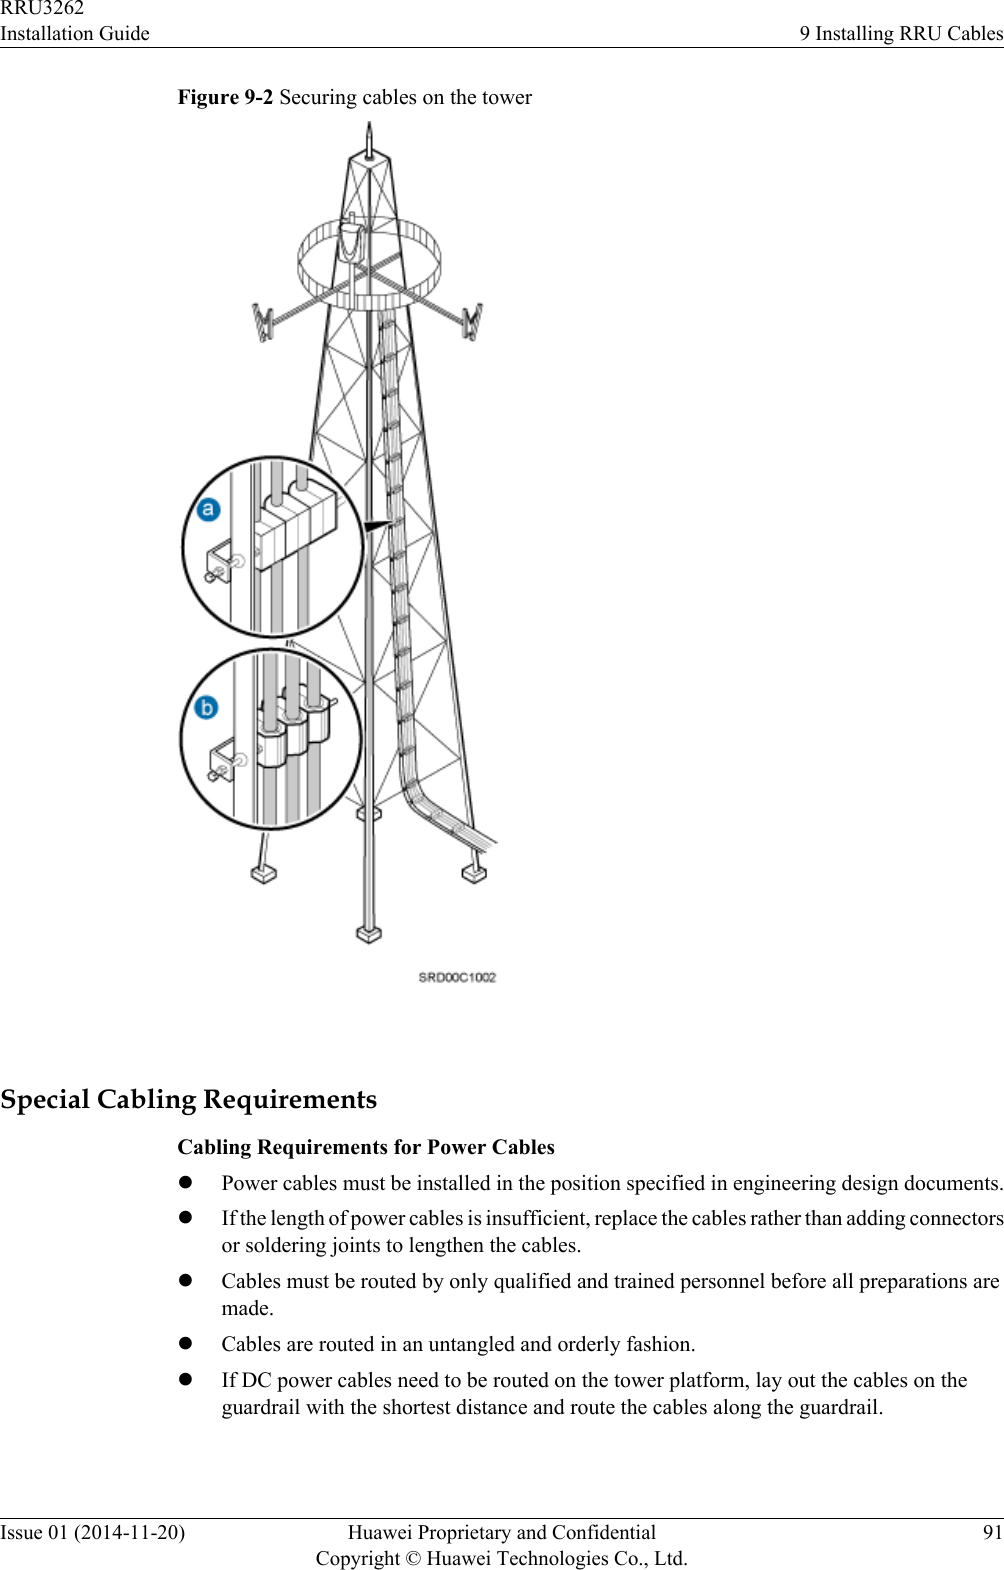 Figure 9-2 Securing cables on the tower Special Cabling RequirementsCabling Requirements for Power CableslPower cables must be installed in the position specified in engineering design documents.lIf the length of power cables is insufficient, replace the cables rather than adding connectorsor soldering joints to lengthen the cables.lCables must be routed by only qualified and trained personnel before all preparations aremade.lCables are routed in an untangled and orderly fashion.lIf DC power cables need to be routed on the tower platform, lay out the cables on theguardrail with the shortest distance and route the cables along the guardrail.RRU3262Installation Guide 9 Installing RRU CablesIssue 01 (2014-11-20) Huawei Proprietary and ConfidentialCopyright © Huawei Technologies Co., Ltd.91